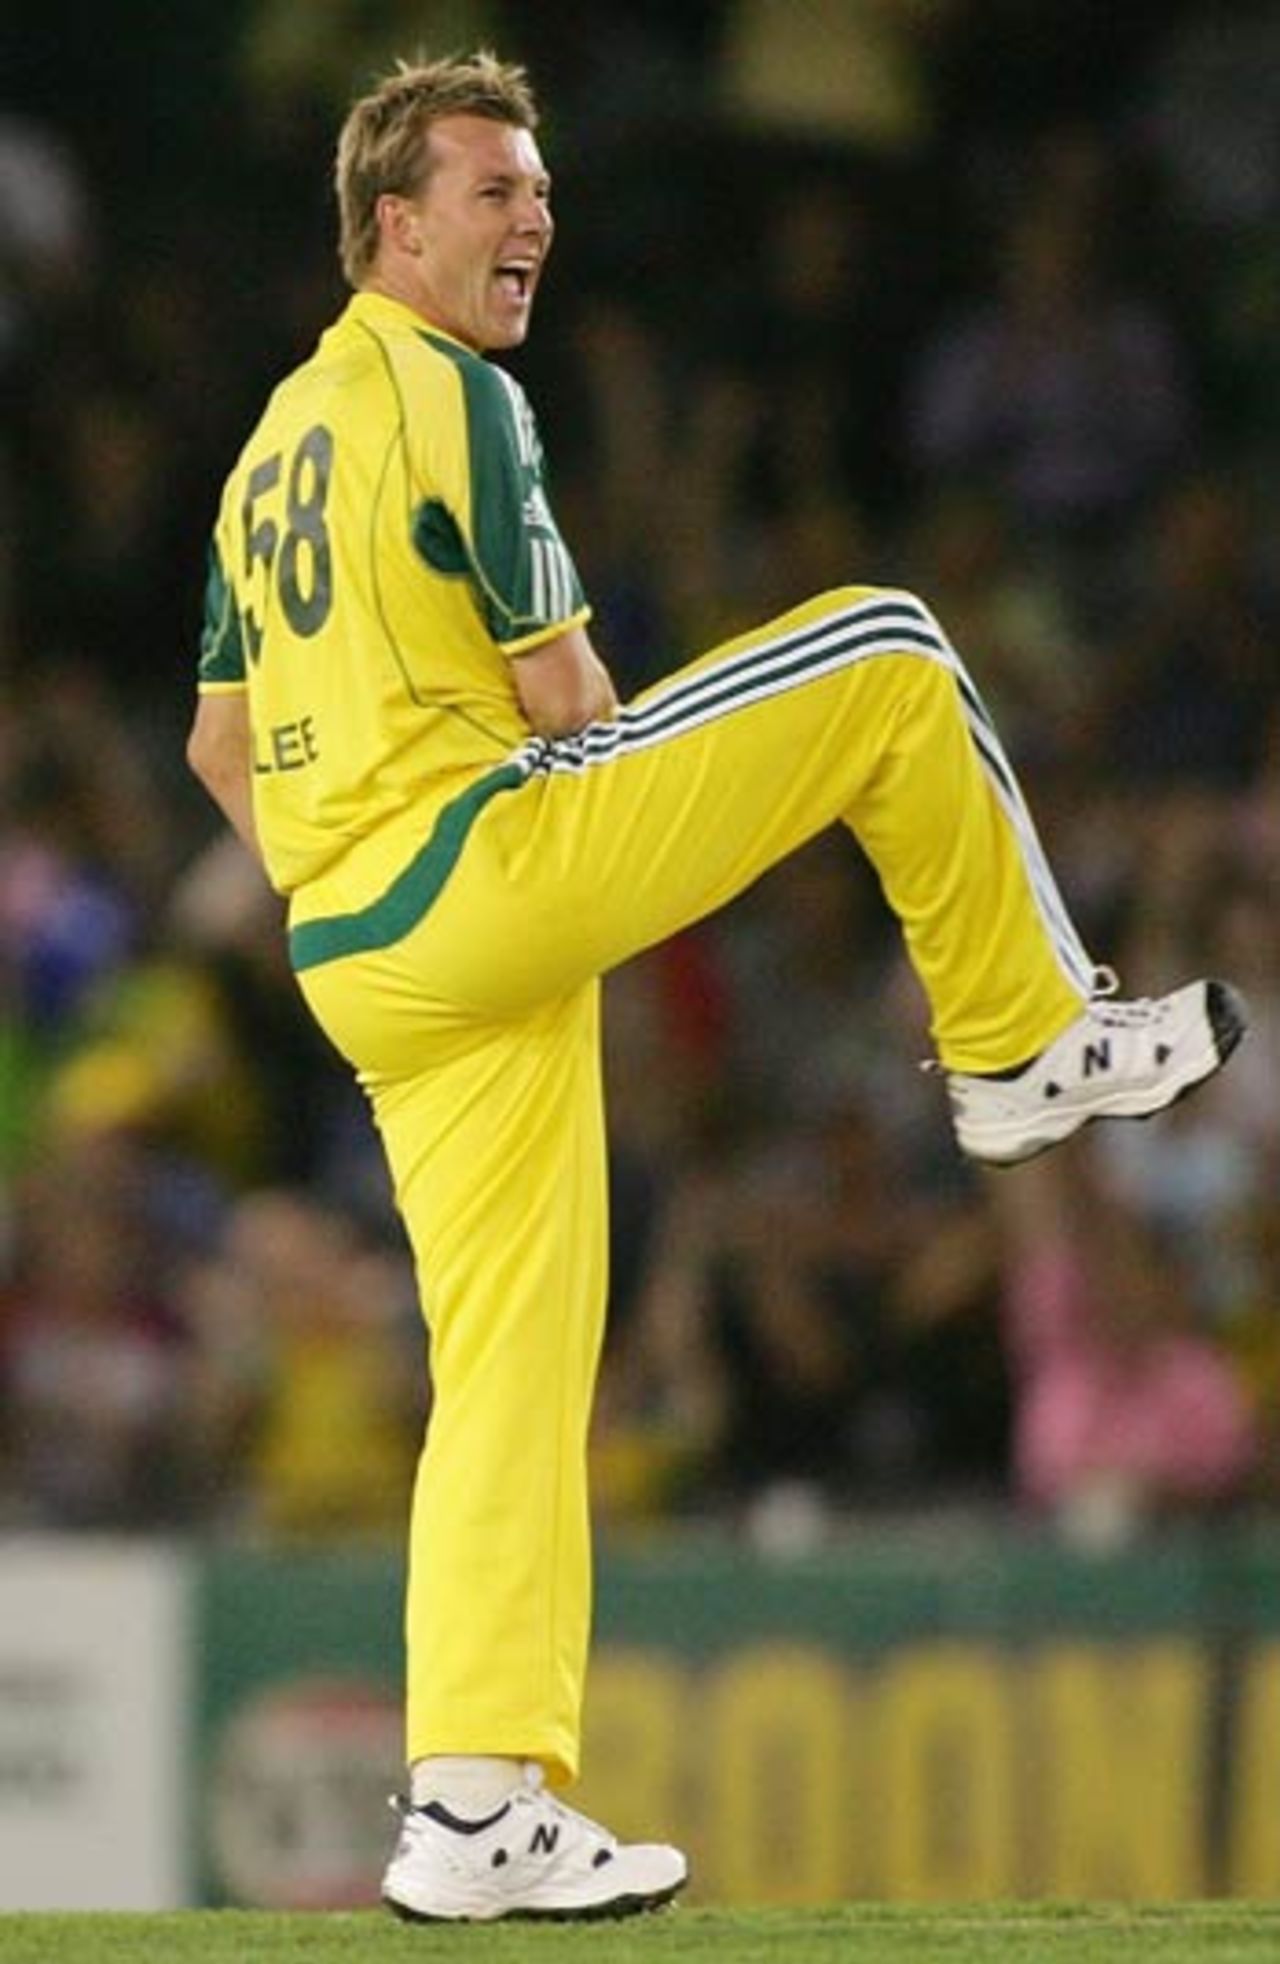 Brett Lee shows his delight after nailing Graeme Smith for a duck, Australia v South Africa, VB Series, Melbourne, February 3, 2006